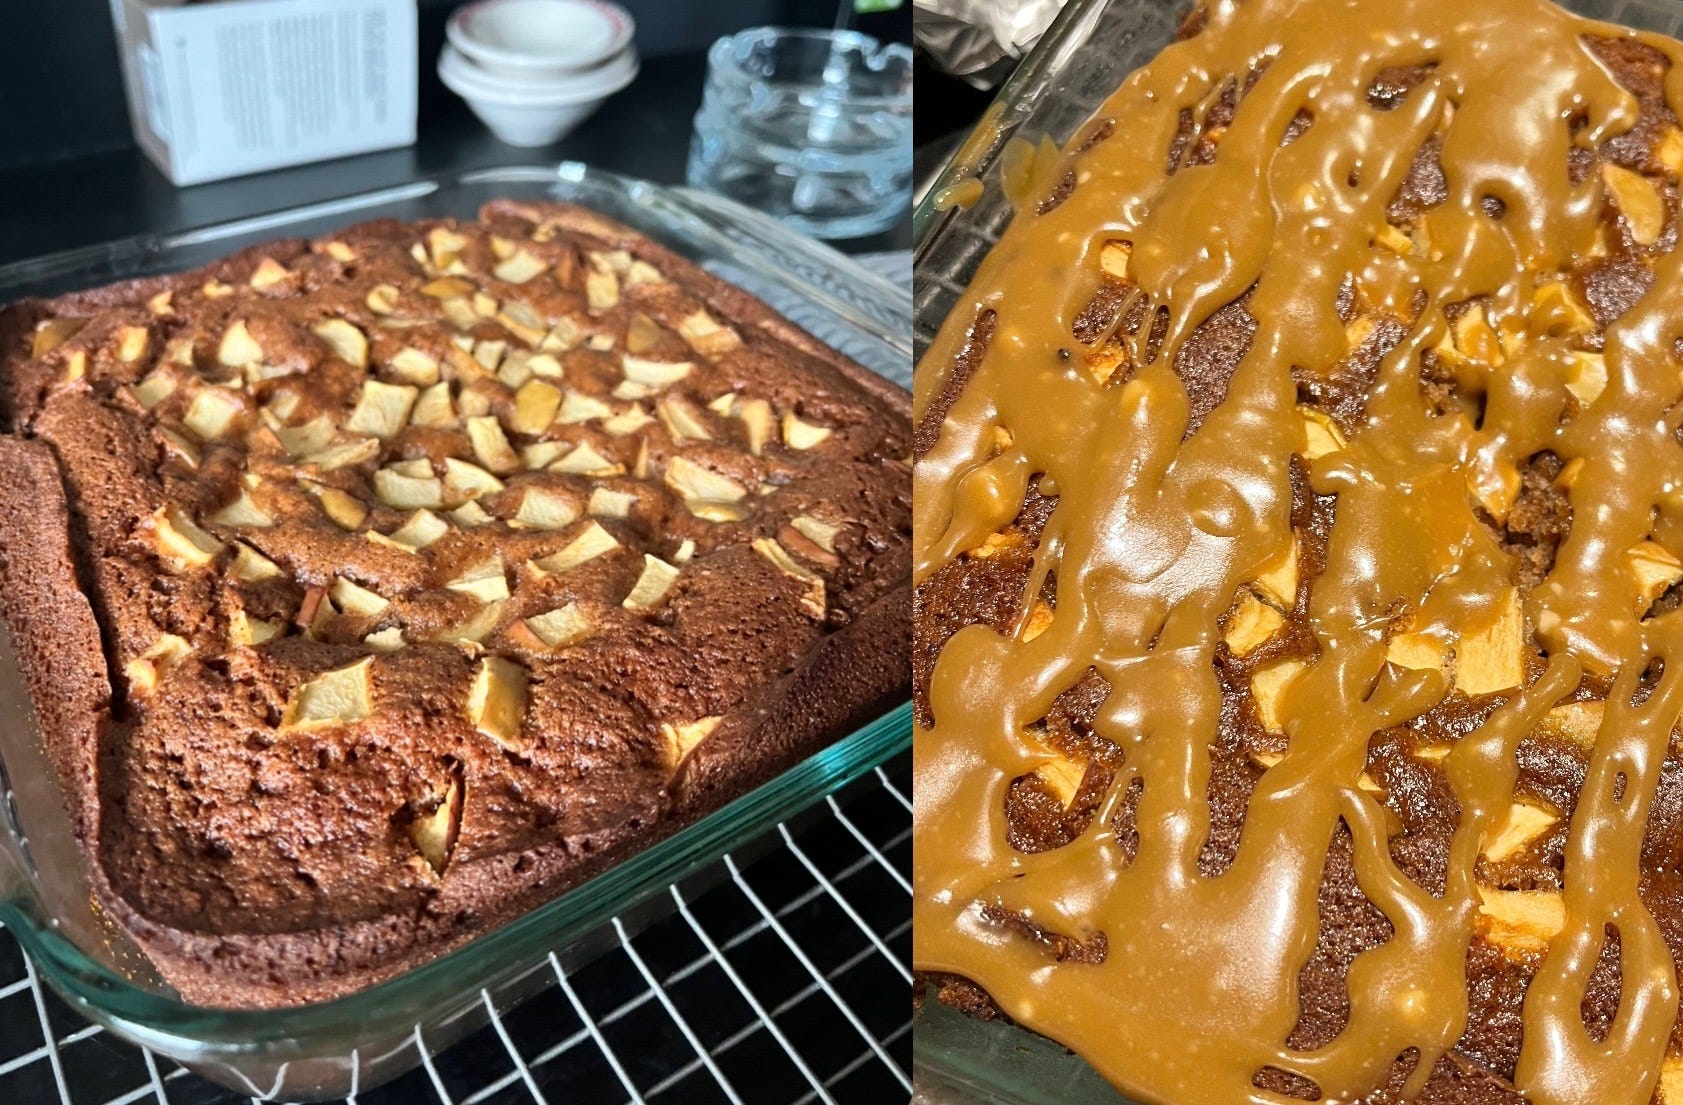 Ruth Reichl's A Better Brownie - This Week for Dinner